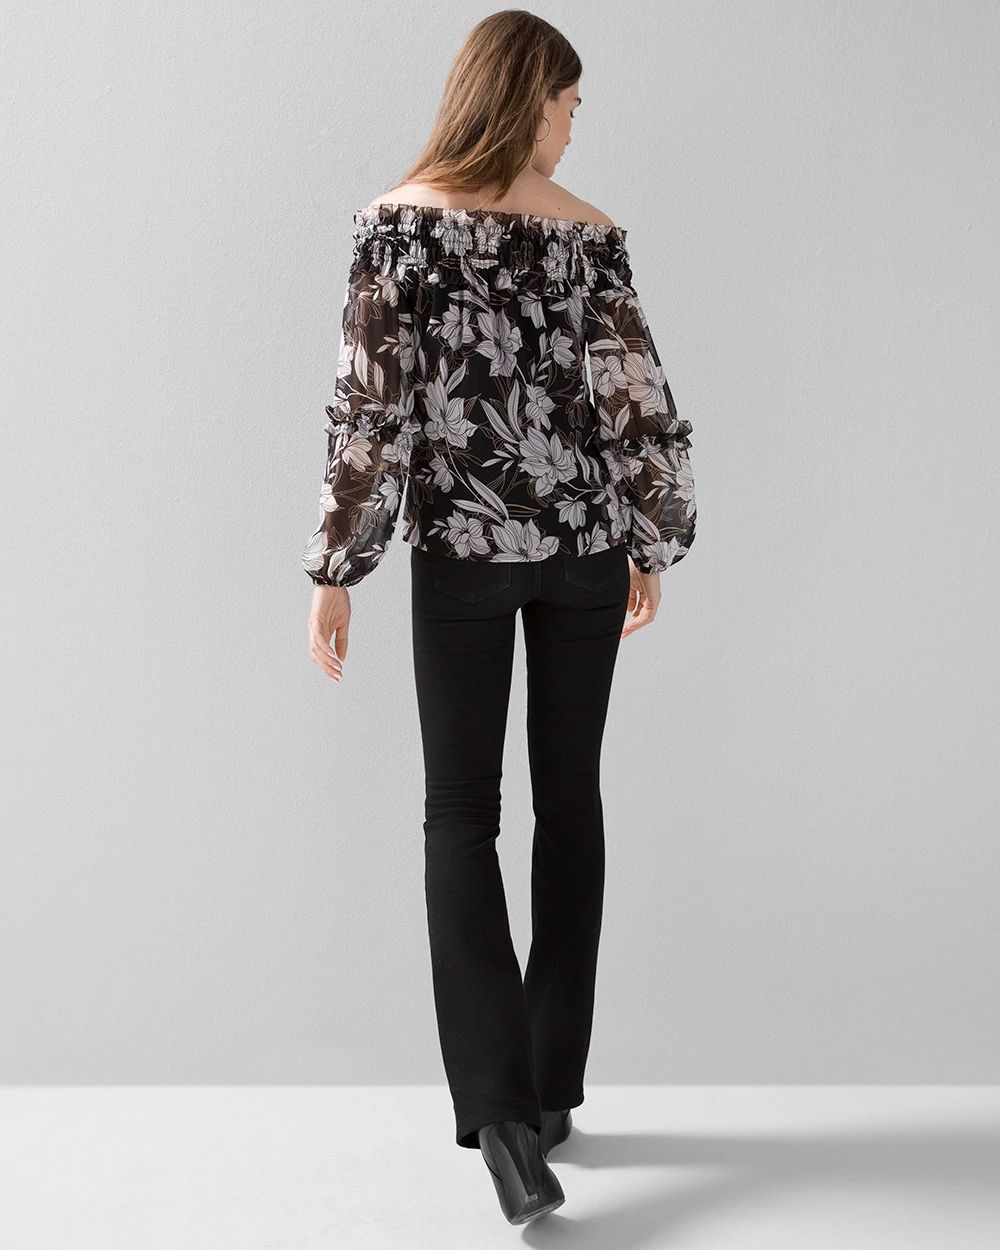 Off-the-Shoulder Chiffon Blouse click to view larger image.